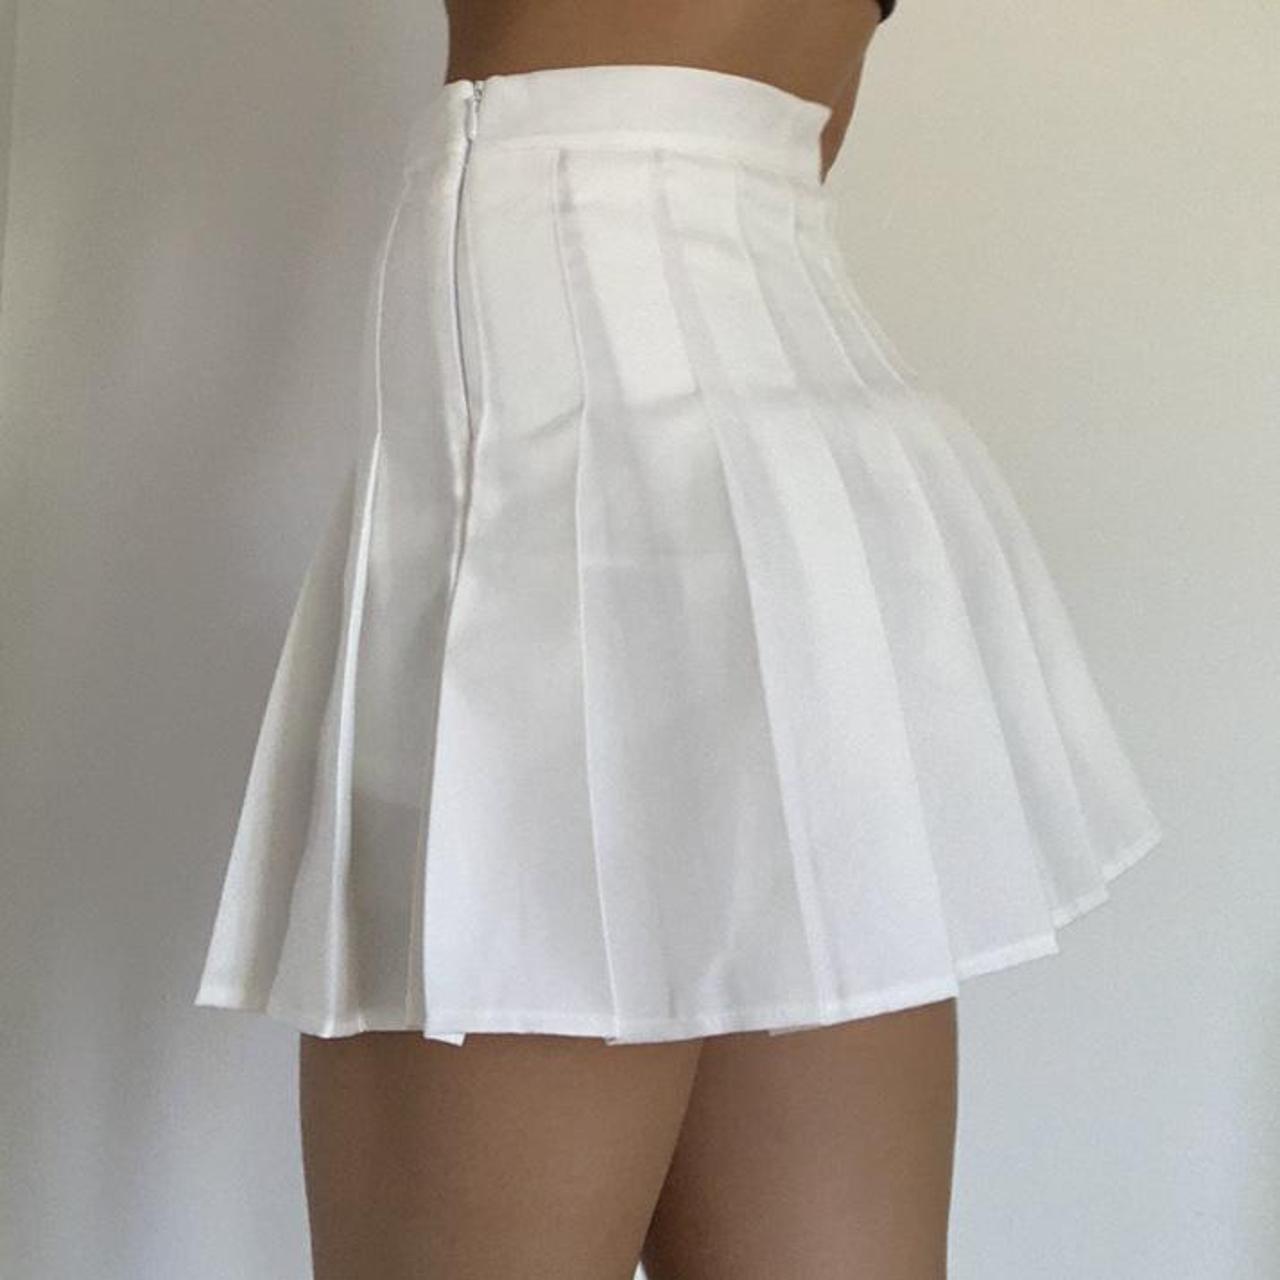 White pleated tennis skirt. Invisible zipper, shorts... - Depop